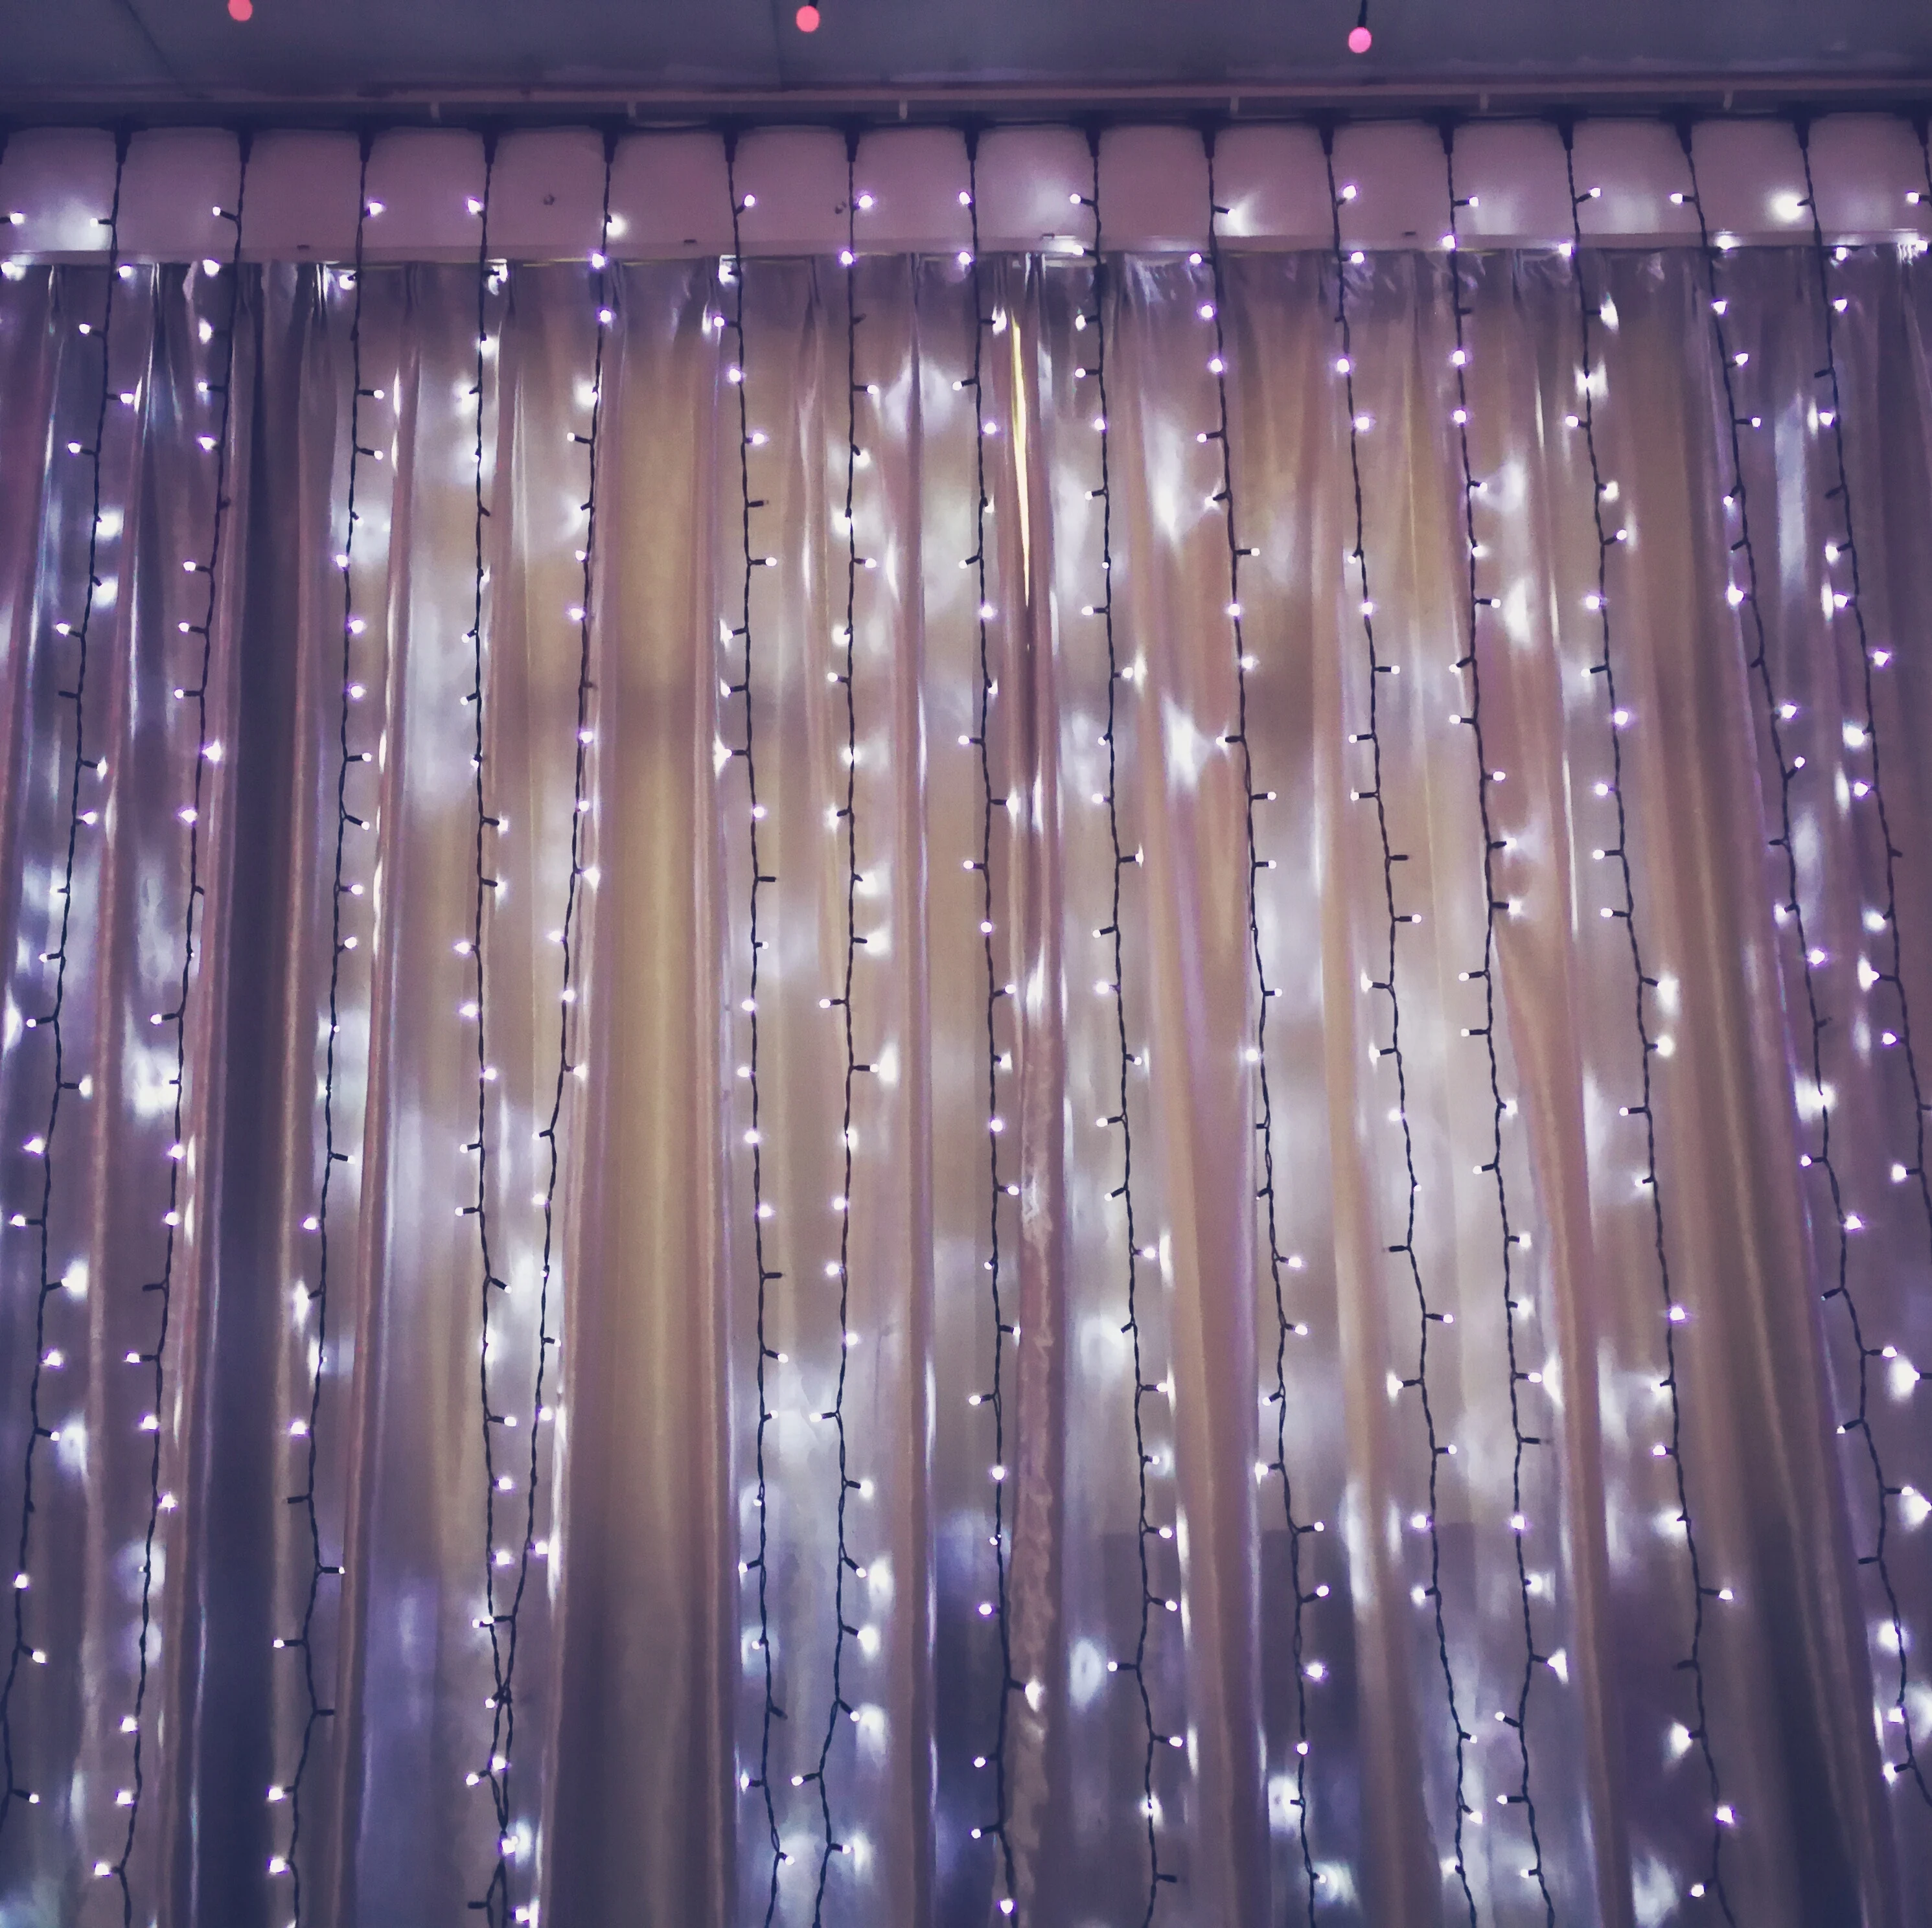 Building And Decoration Warm White Decorative Led Rubber Blister Wall Safety Light Curtain